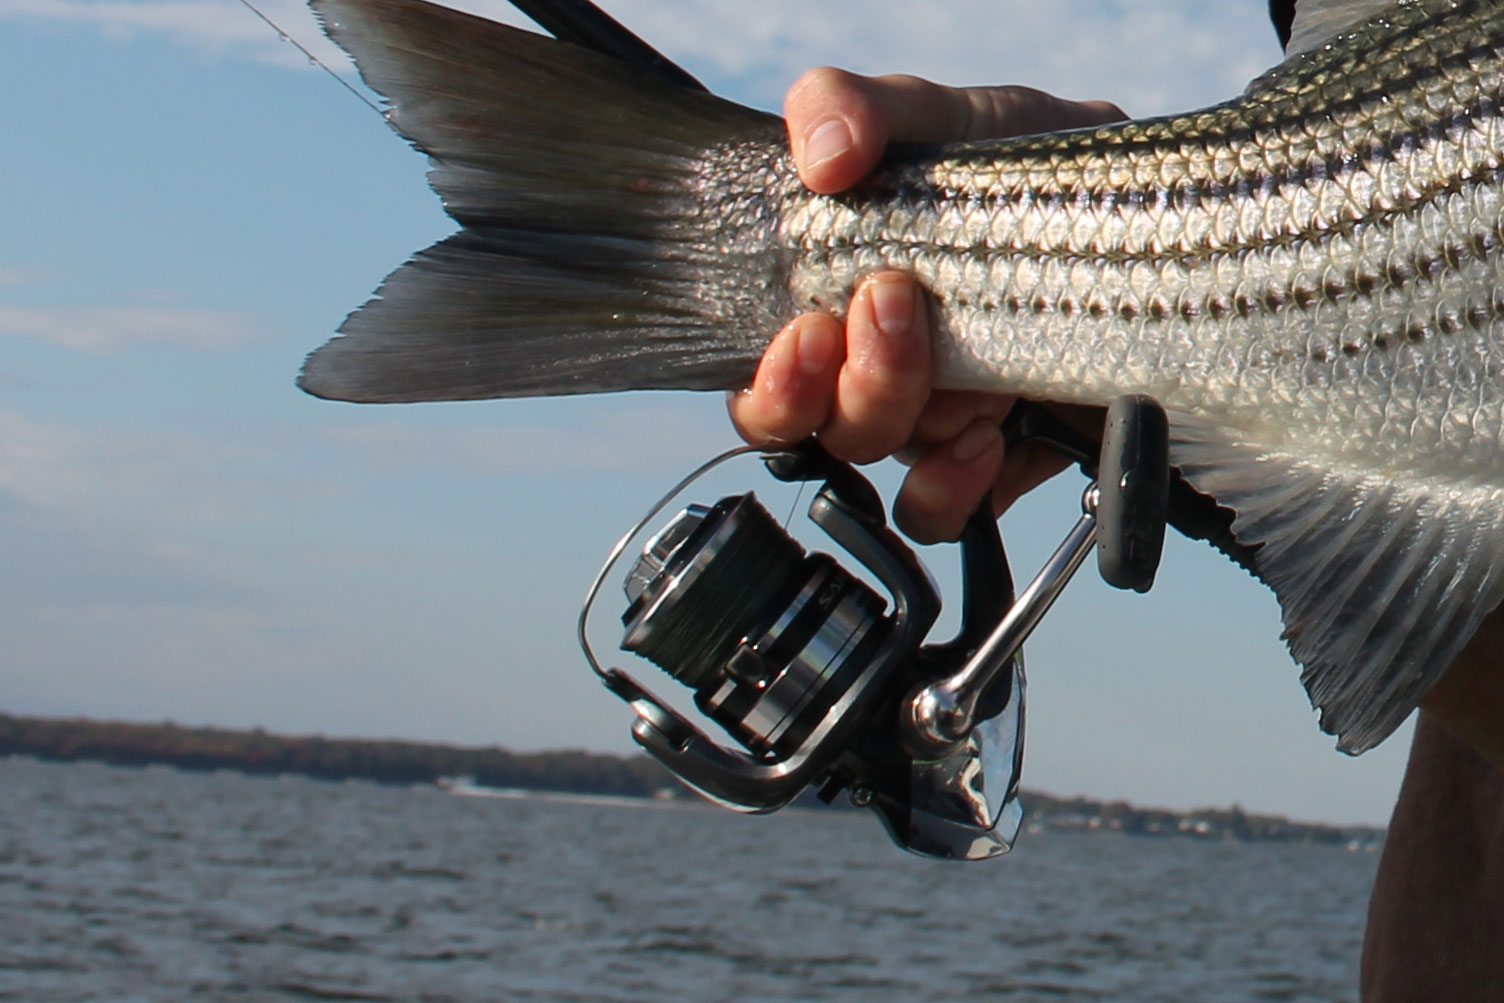 The Stradic C3000 spinning reels we tested saw plenty of use, and held up like champs.